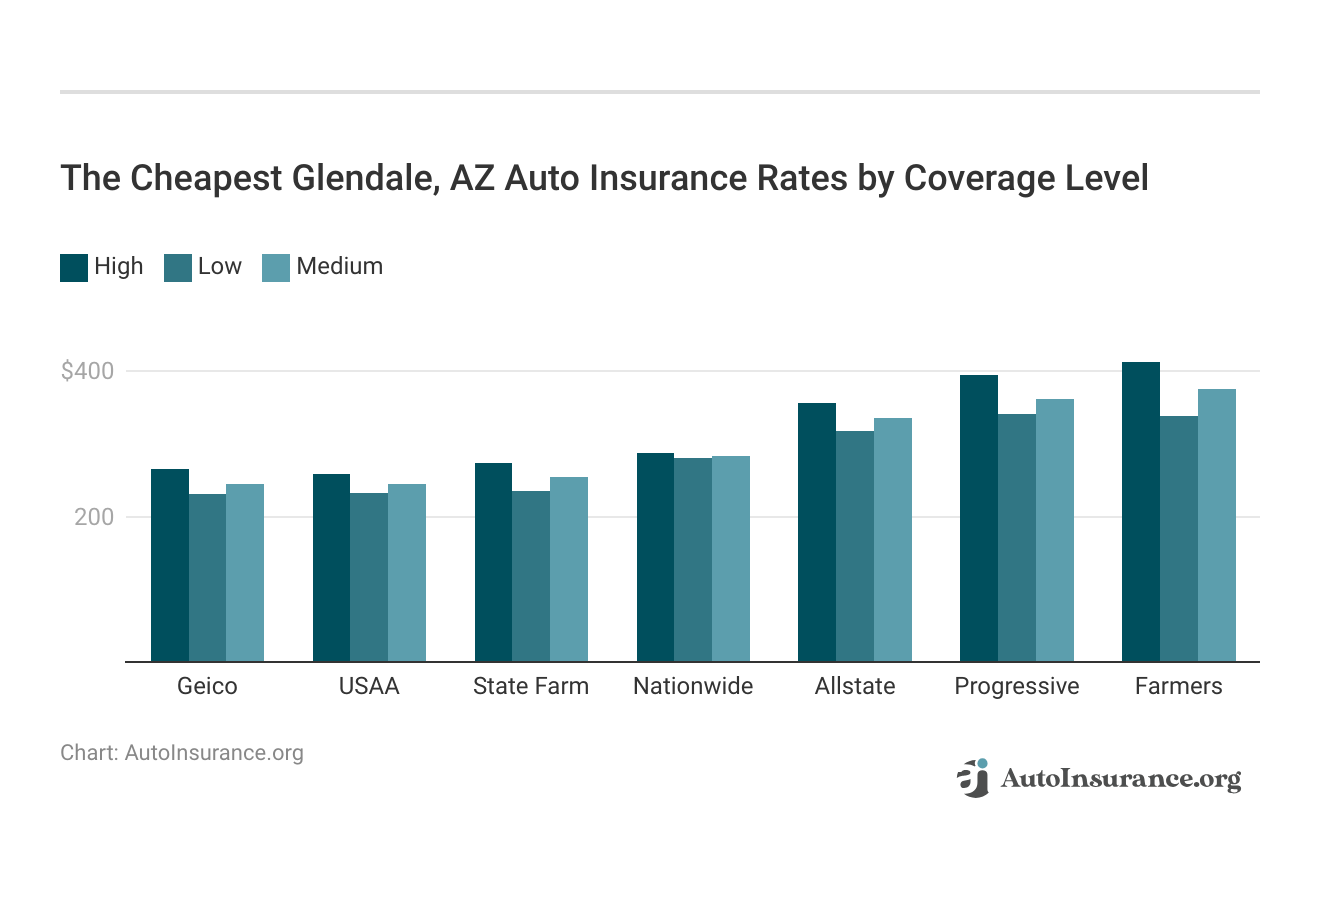 <h3>The Cheapest Glendale, AZ Auto Insurance Rates by Coverage Level</h3>